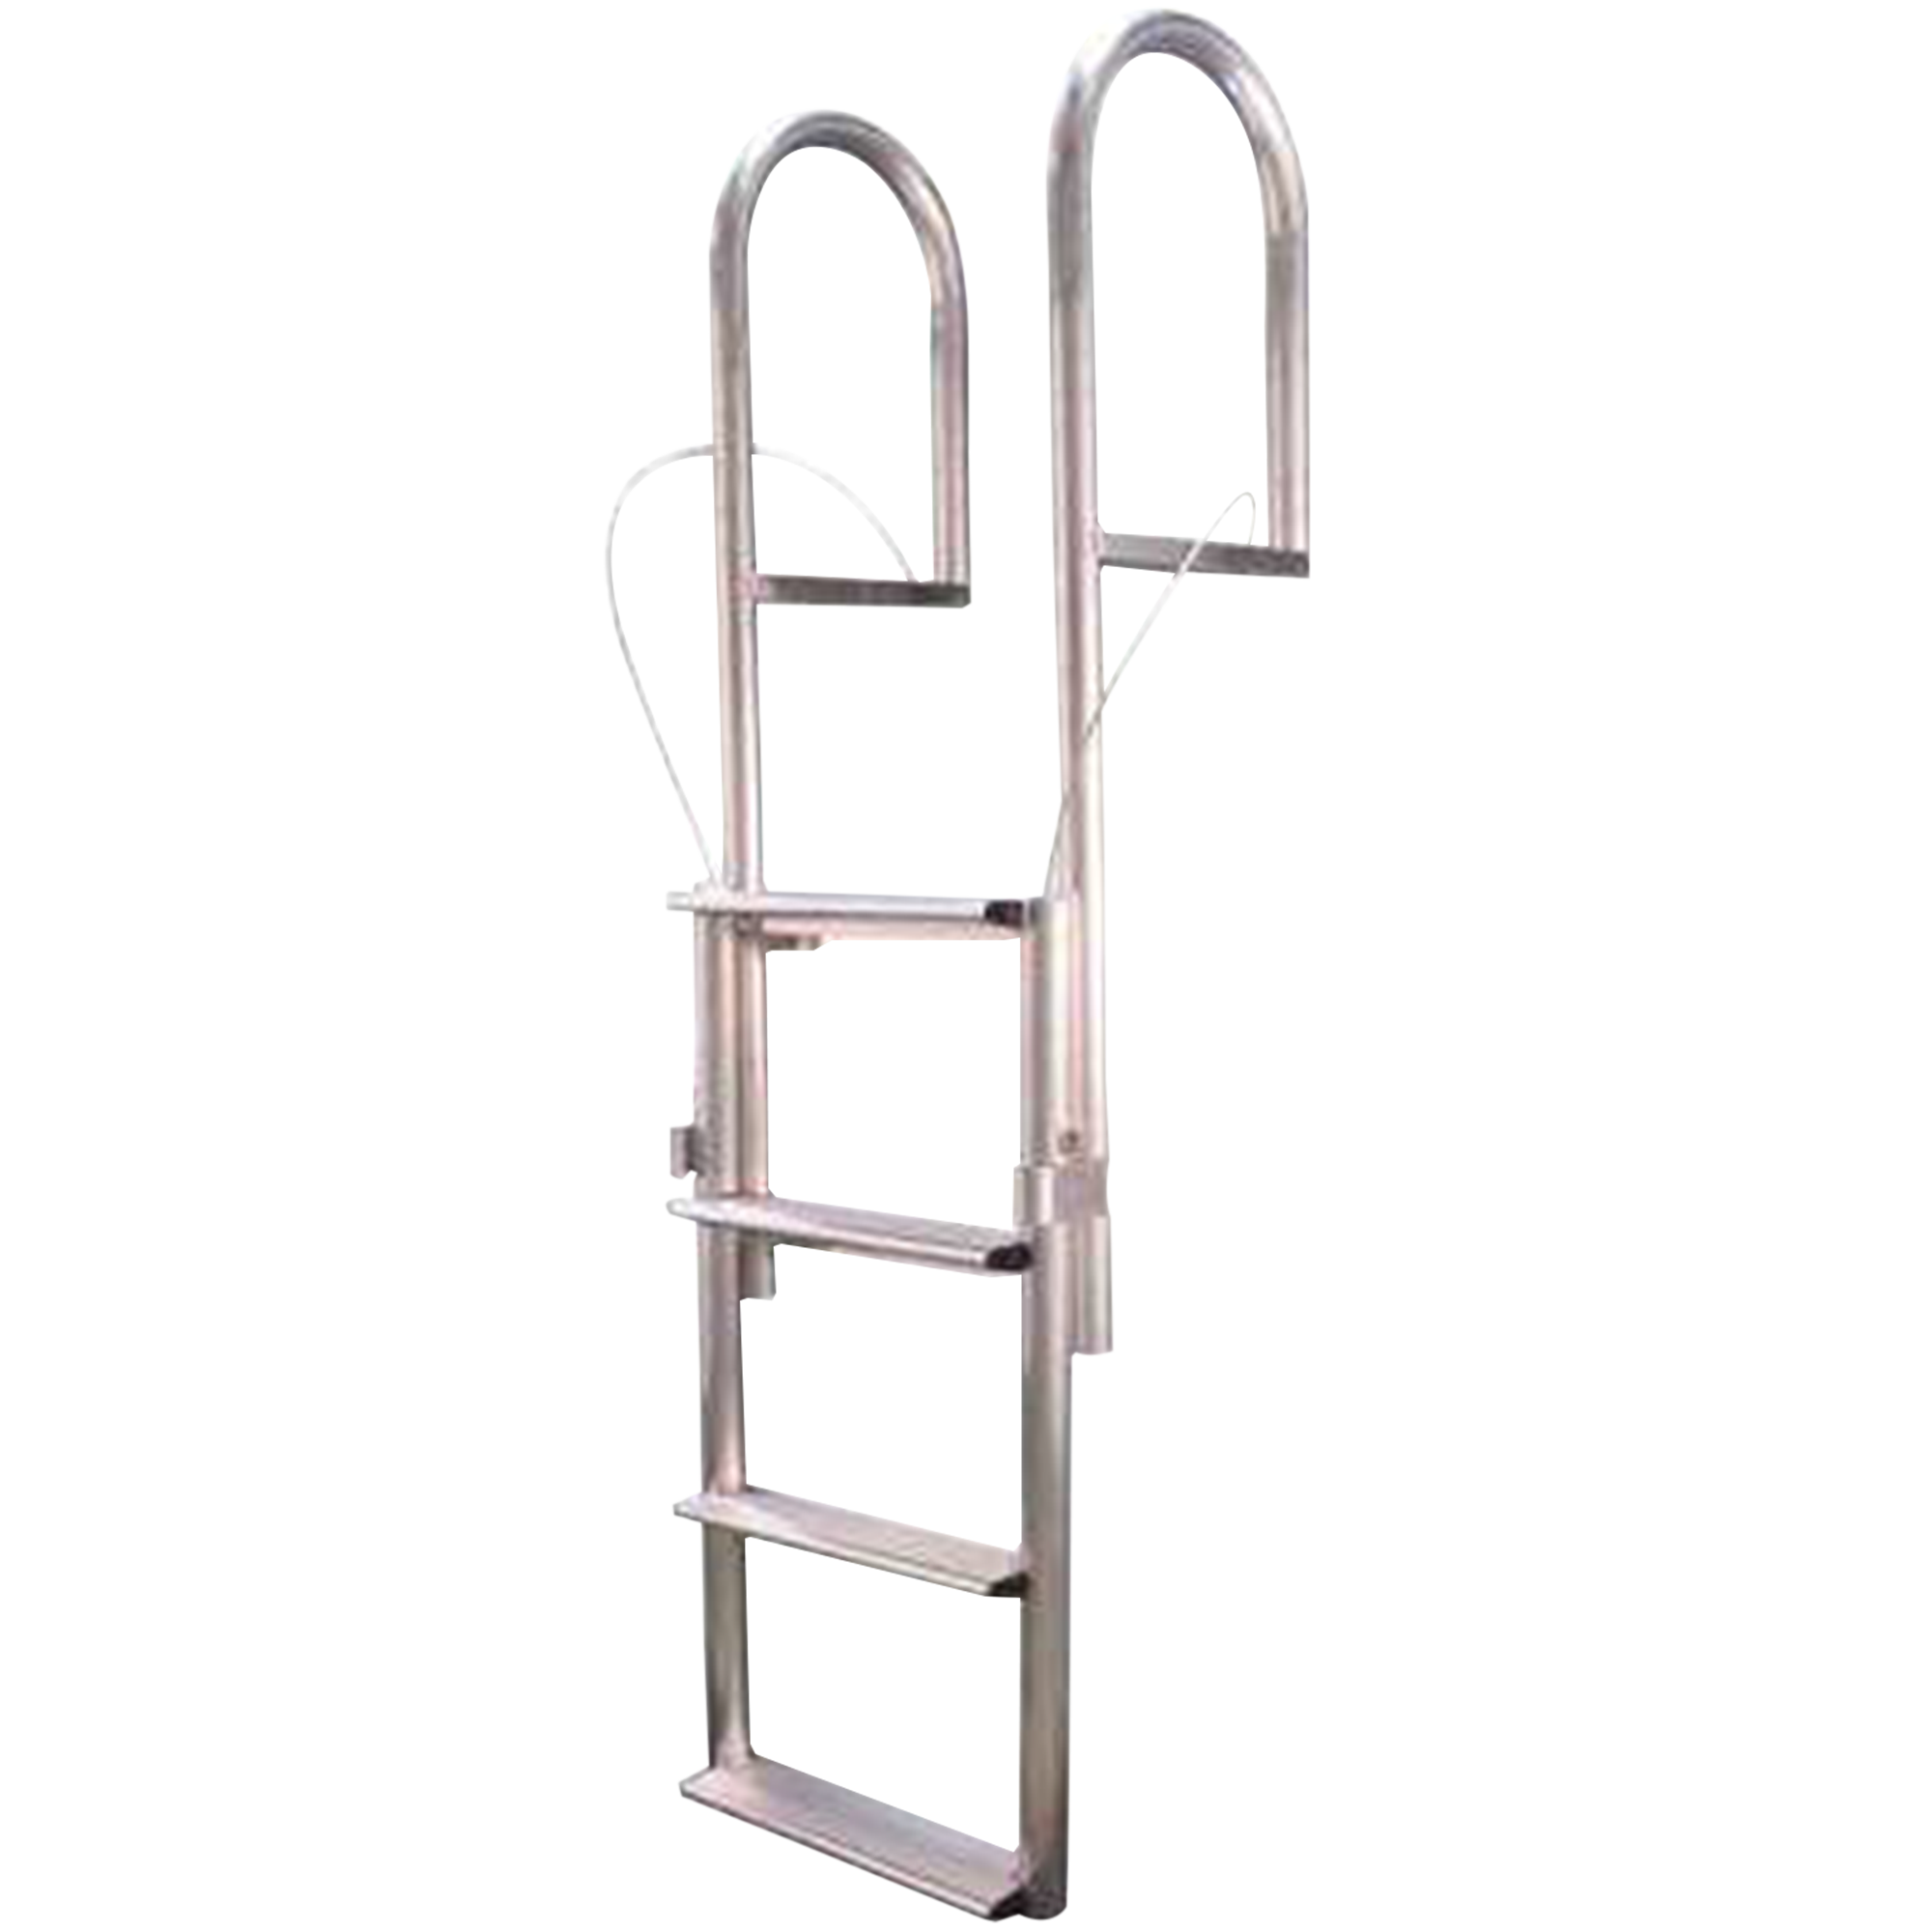 Aluminum Lifting Ladder - 4" Wide Step - 2 Lengths Available